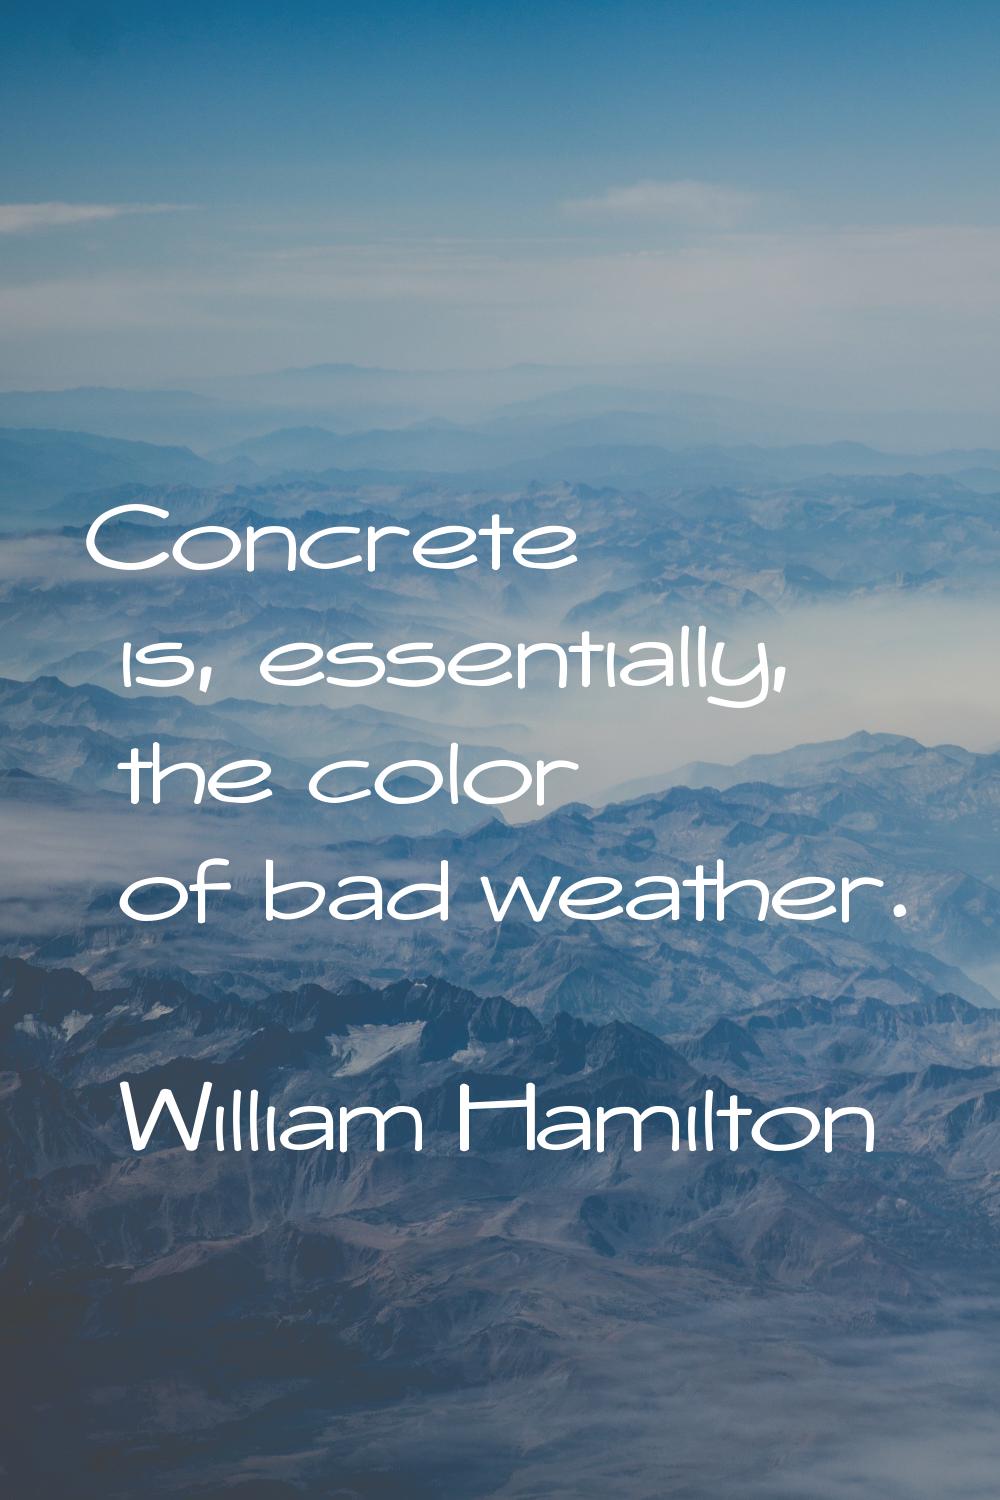 Concrete is, essentially, the color of bad weather.